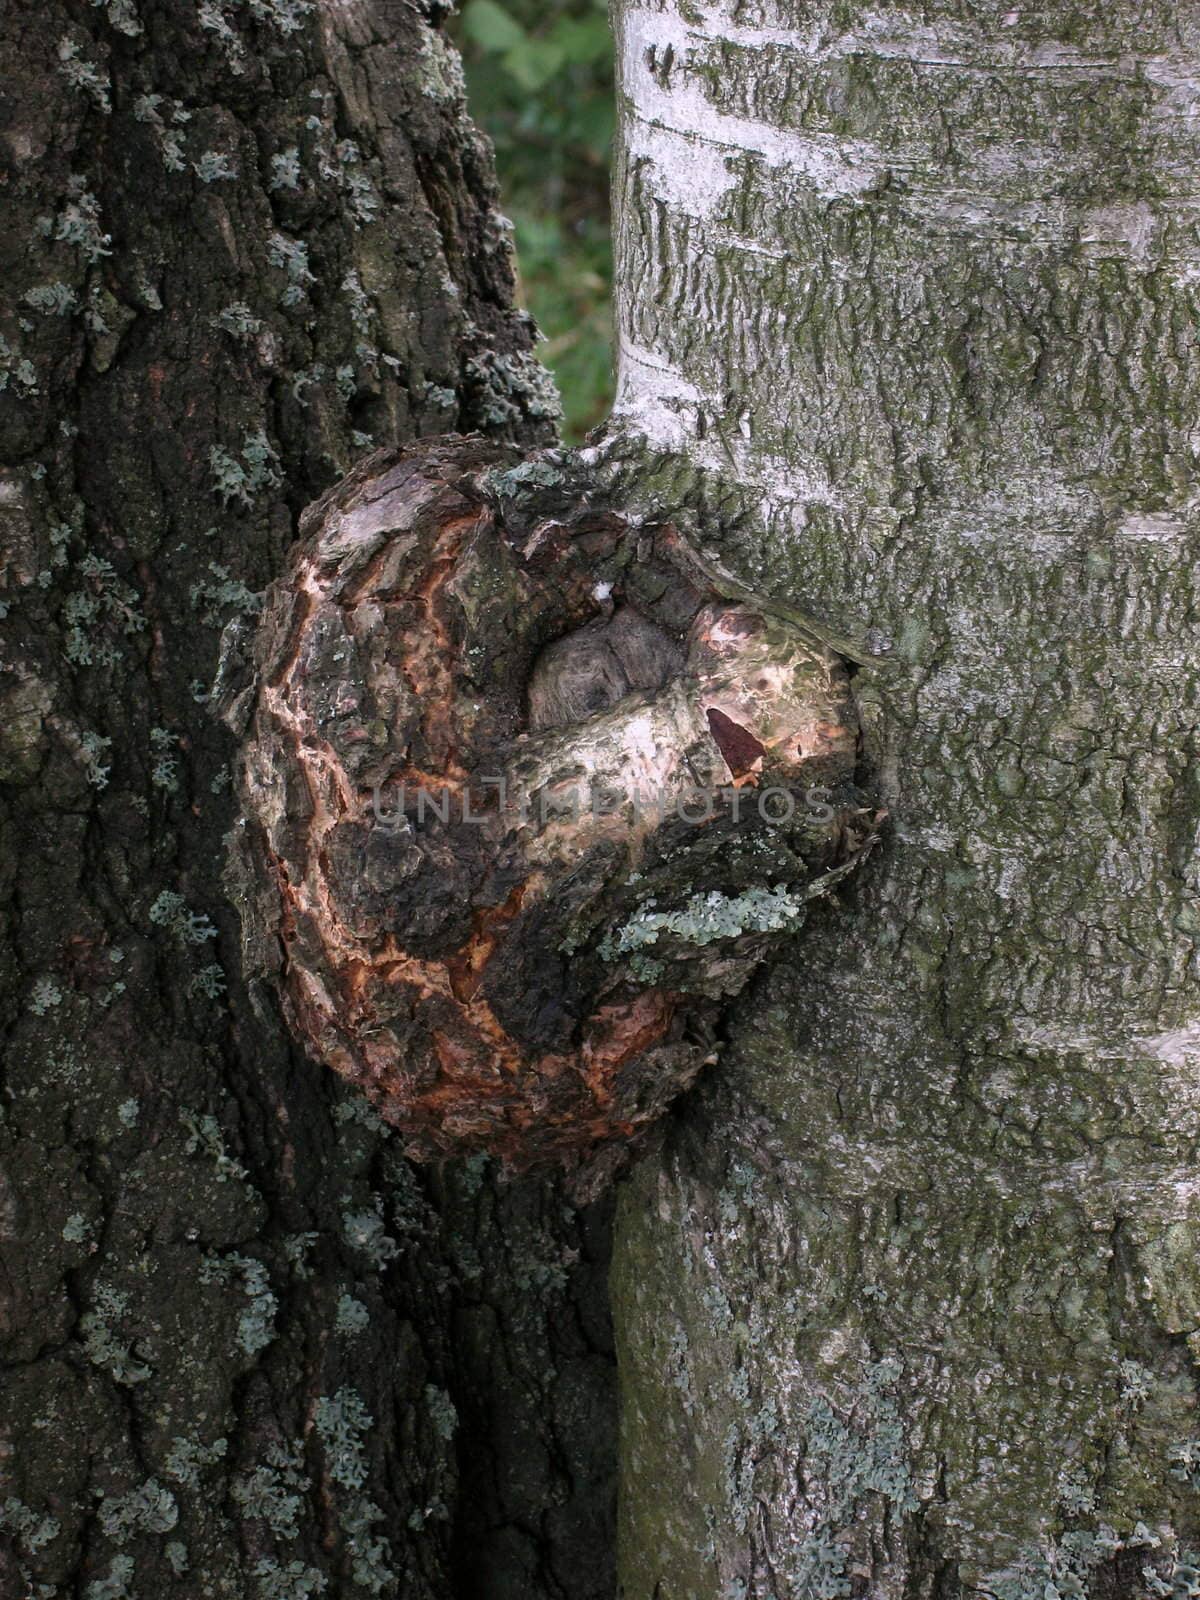 Excrescence on the birch tree trunk by Vitamin